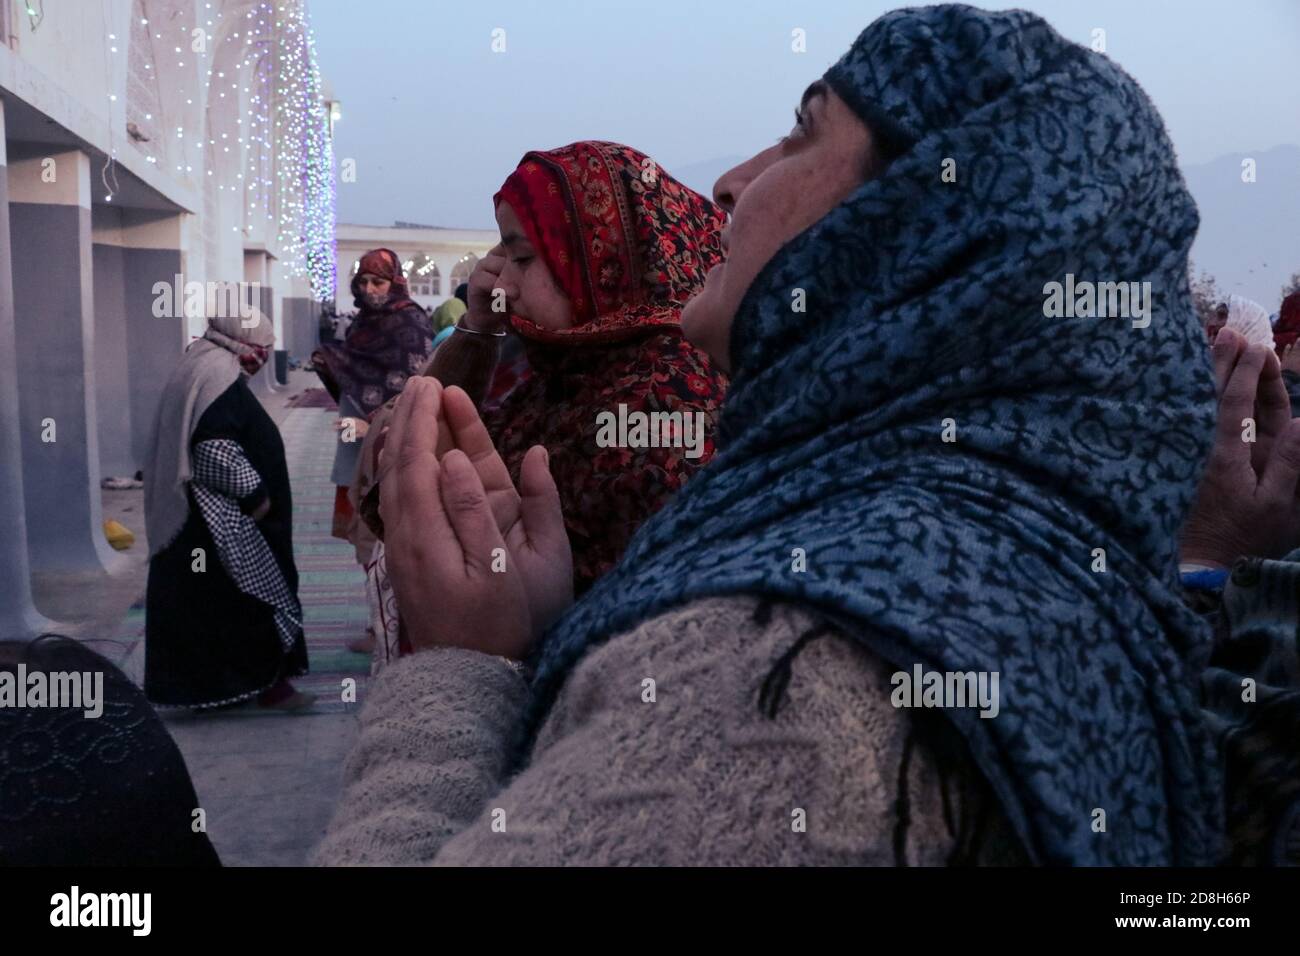 Srinagar, India. 30th Oct, 2020. Kashmiri Muslim devotees look towards a cleric (not seen in the picture) displaying the holy relic believed to be the whisker from the beard of the Prophet Mohammed, at Hazratbal shrine on the Eid-e-Milad, or the birth anniversary of Prophet Mohammad in Srinagar. (Photo by Adil Abass/Pacific Press) Credit: Pacific Press Media Production Corp./Alamy Live News Stock Photo